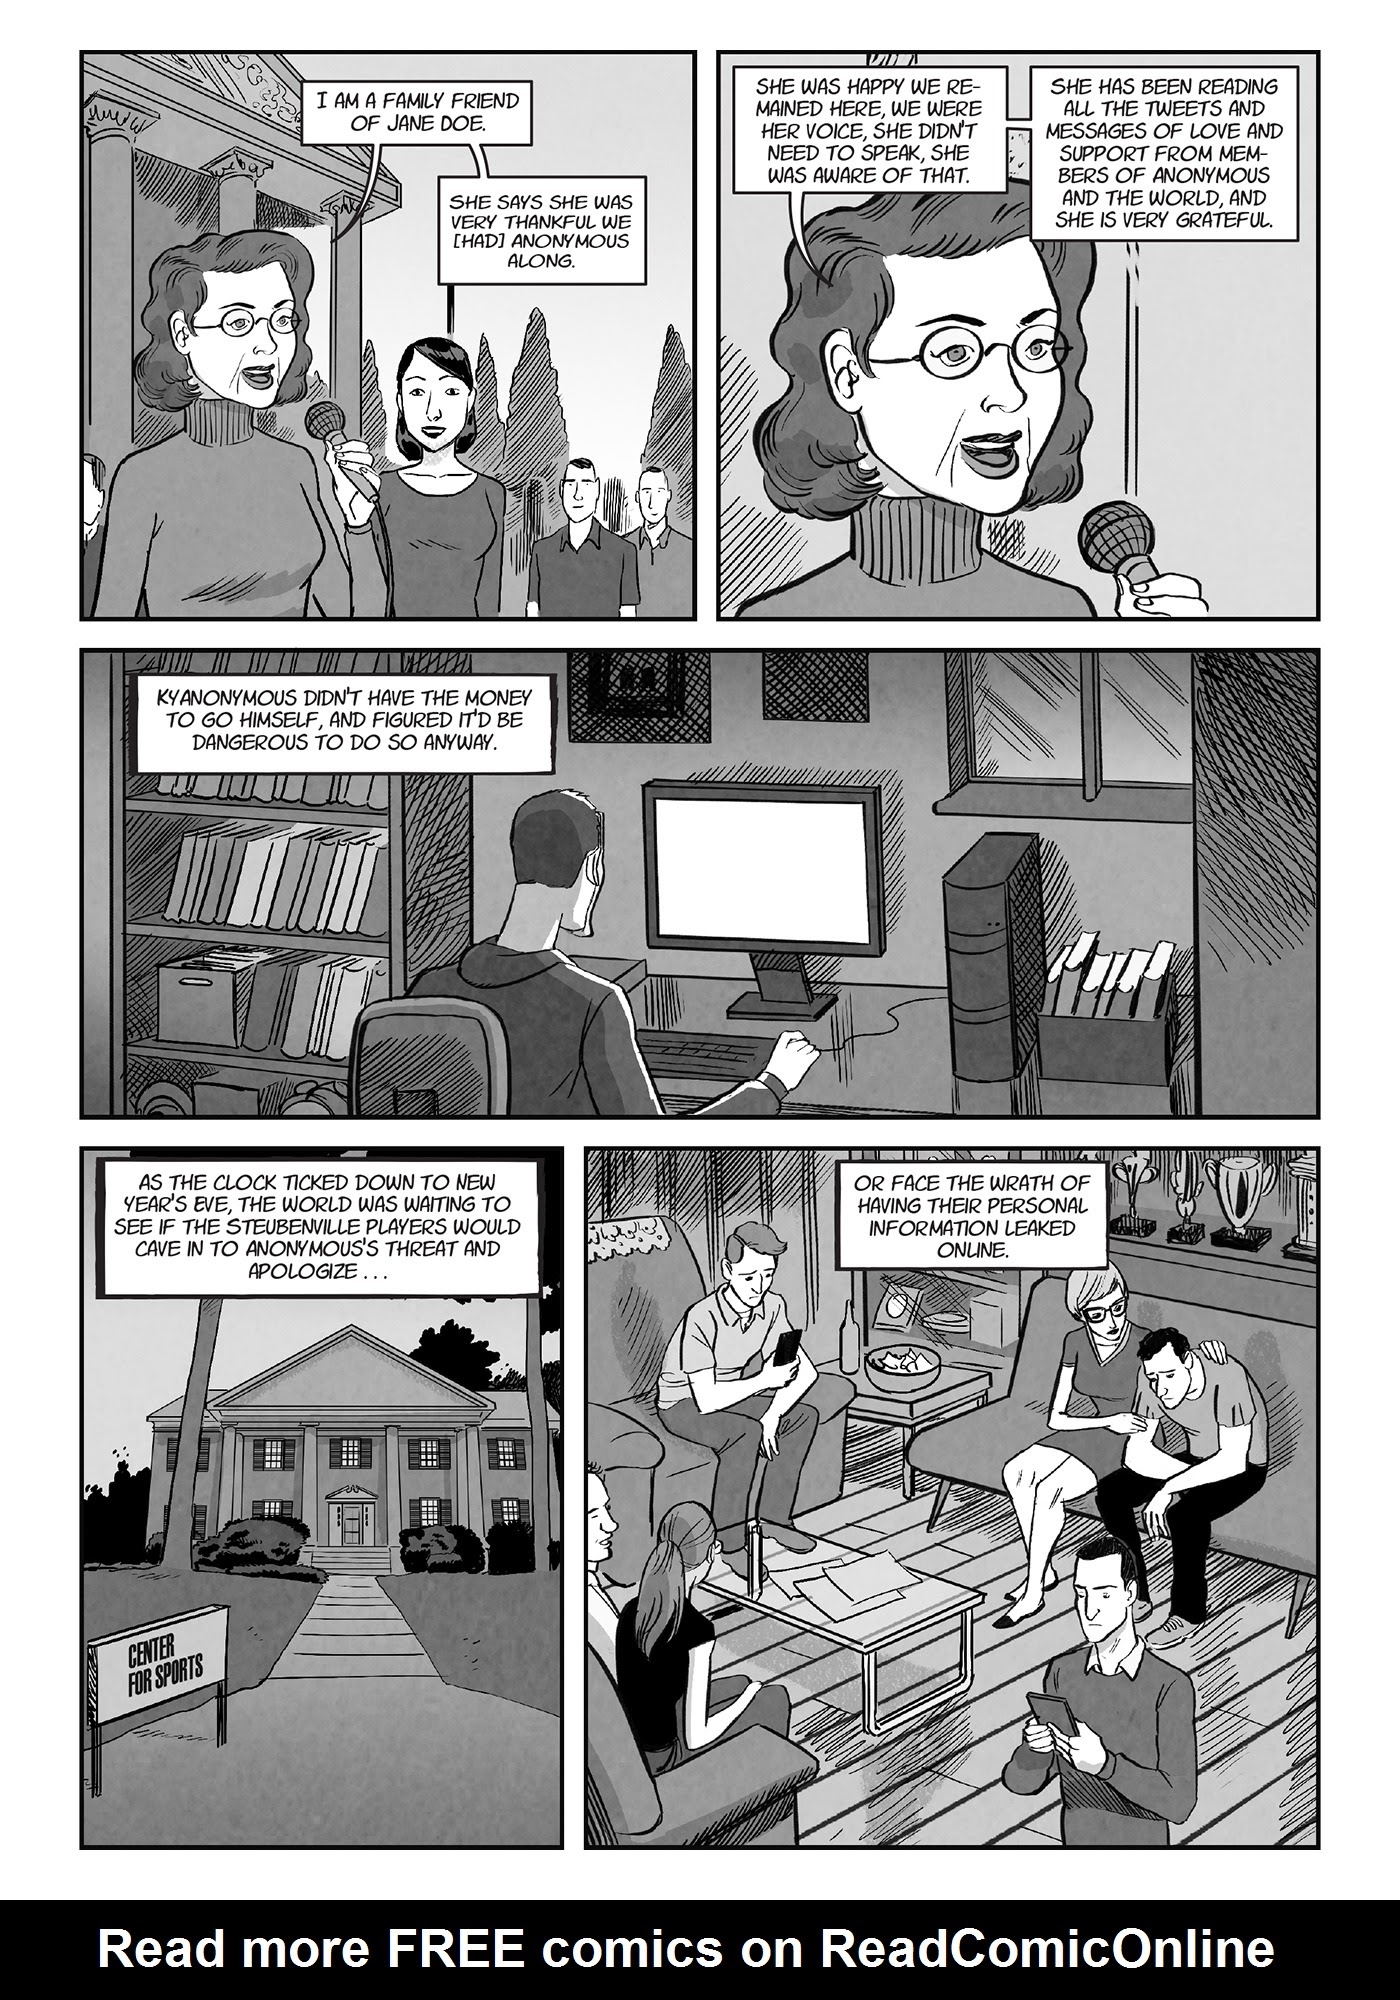 Read online A for Anonymous: How a Mysterious Hacker Collective Transformed the World comic -  Issue # TPB - 92